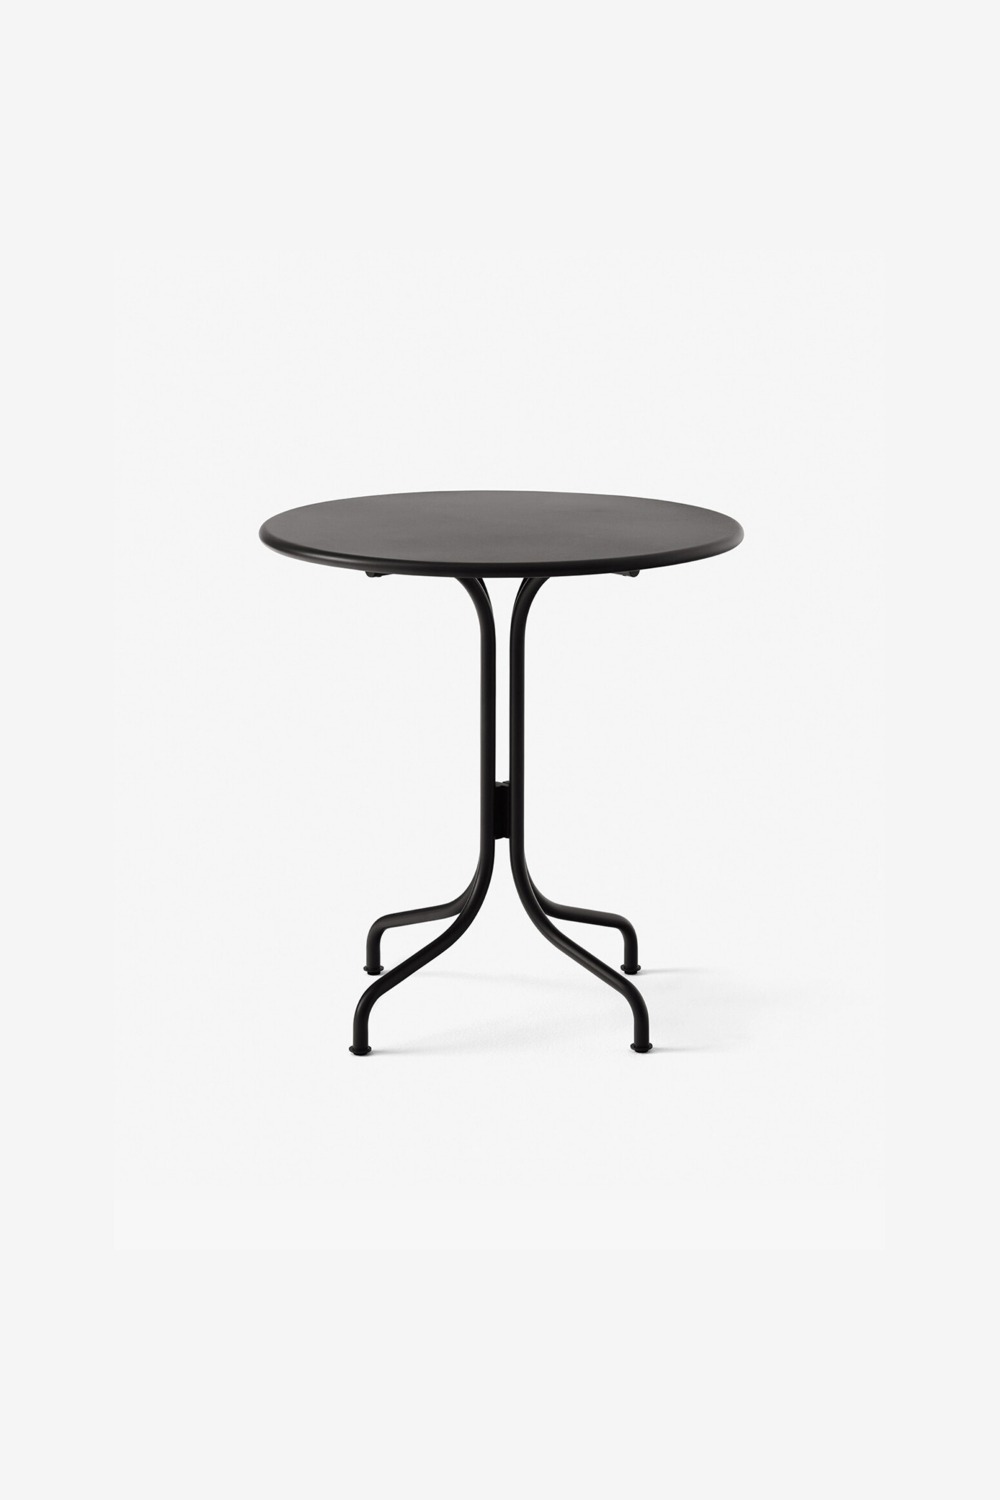 [&amp;Tradition] Thorvald Cafe Table /SC96 (Black)